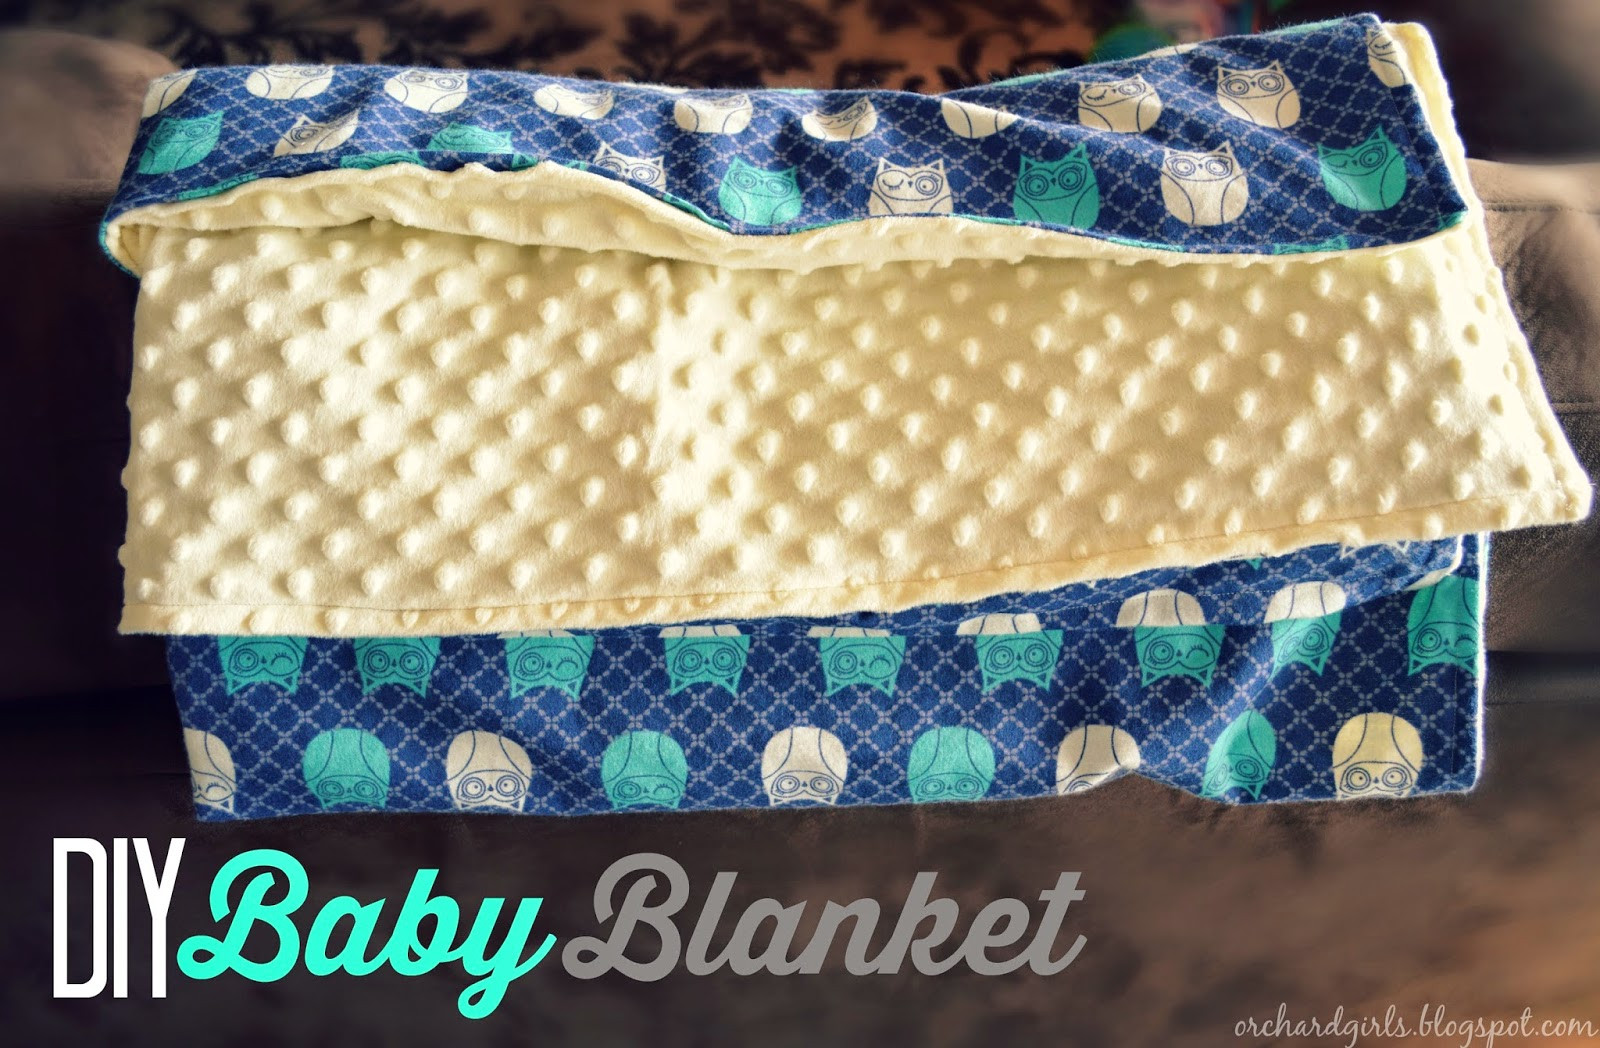 Baby Blankets DIY
 Orchard Girls Super easy DIY Baby Blanket Tutorial with minky and cuddle fabric